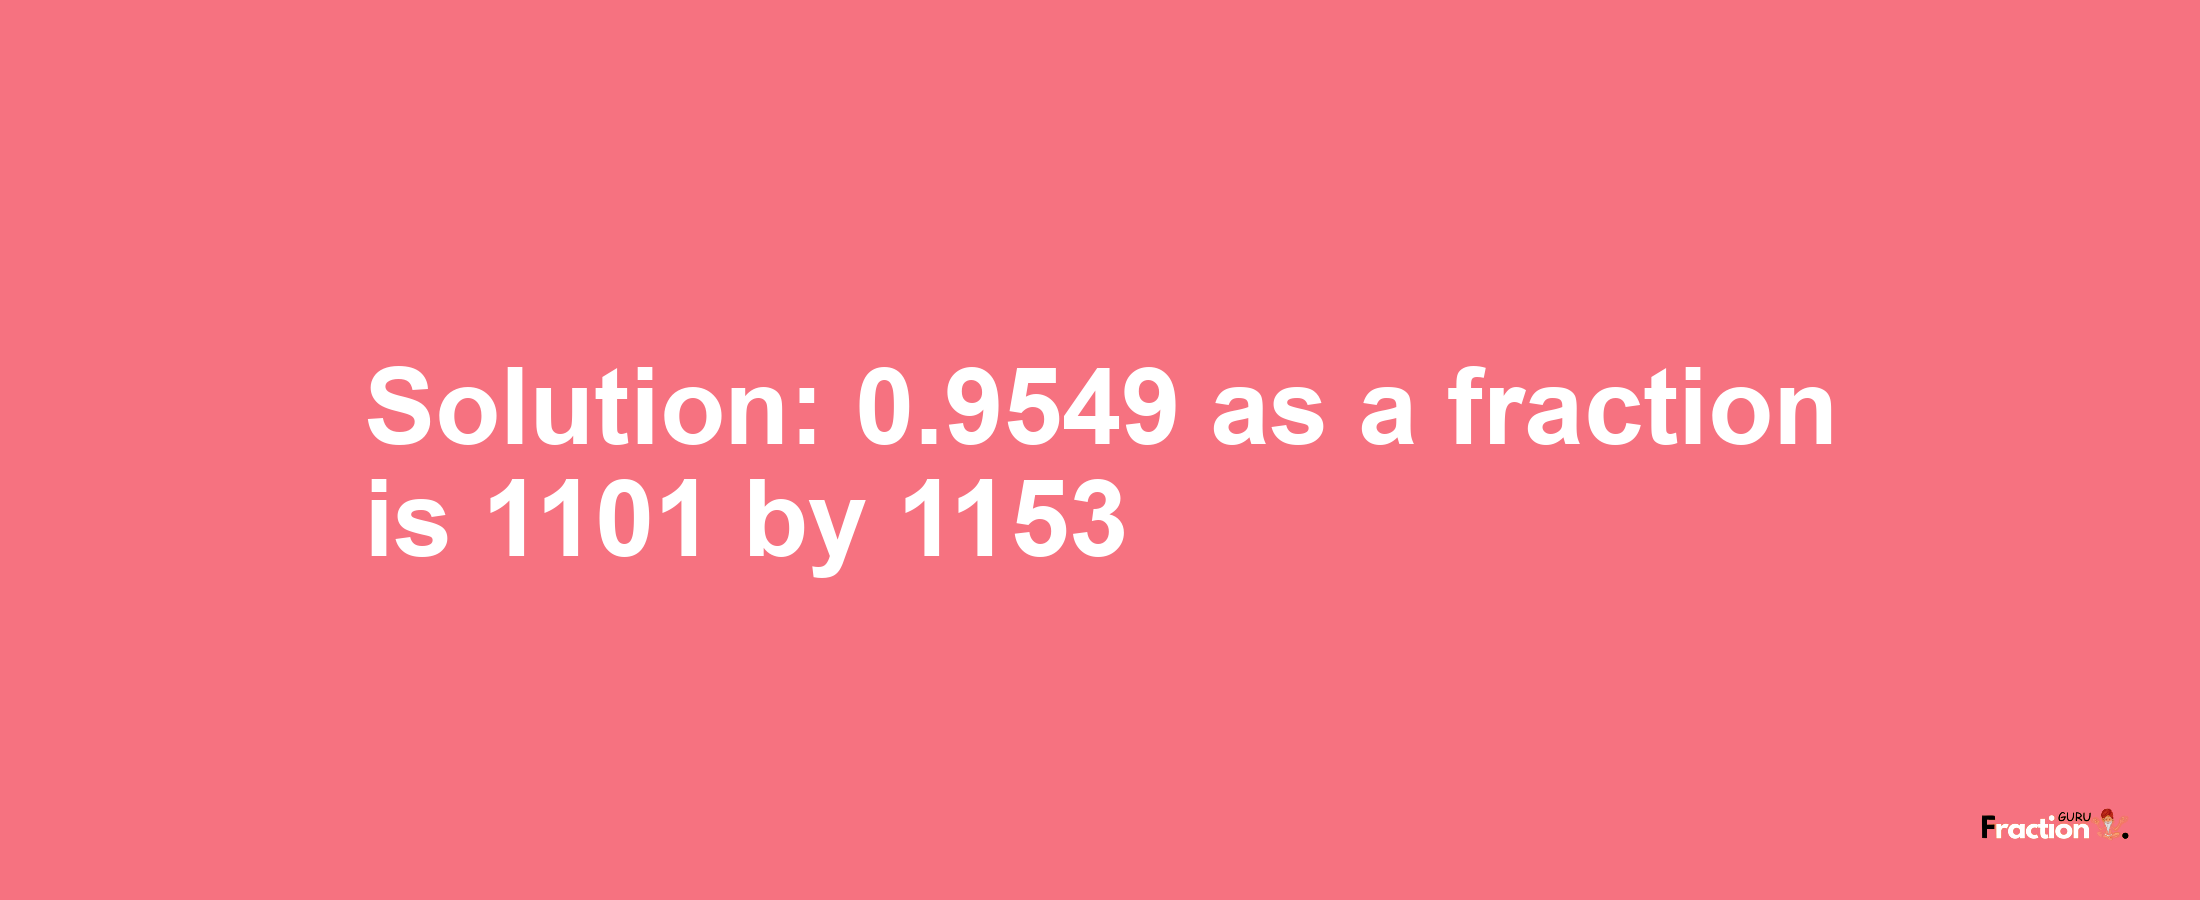 Solution:0.9549 as a fraction is 1101/1153